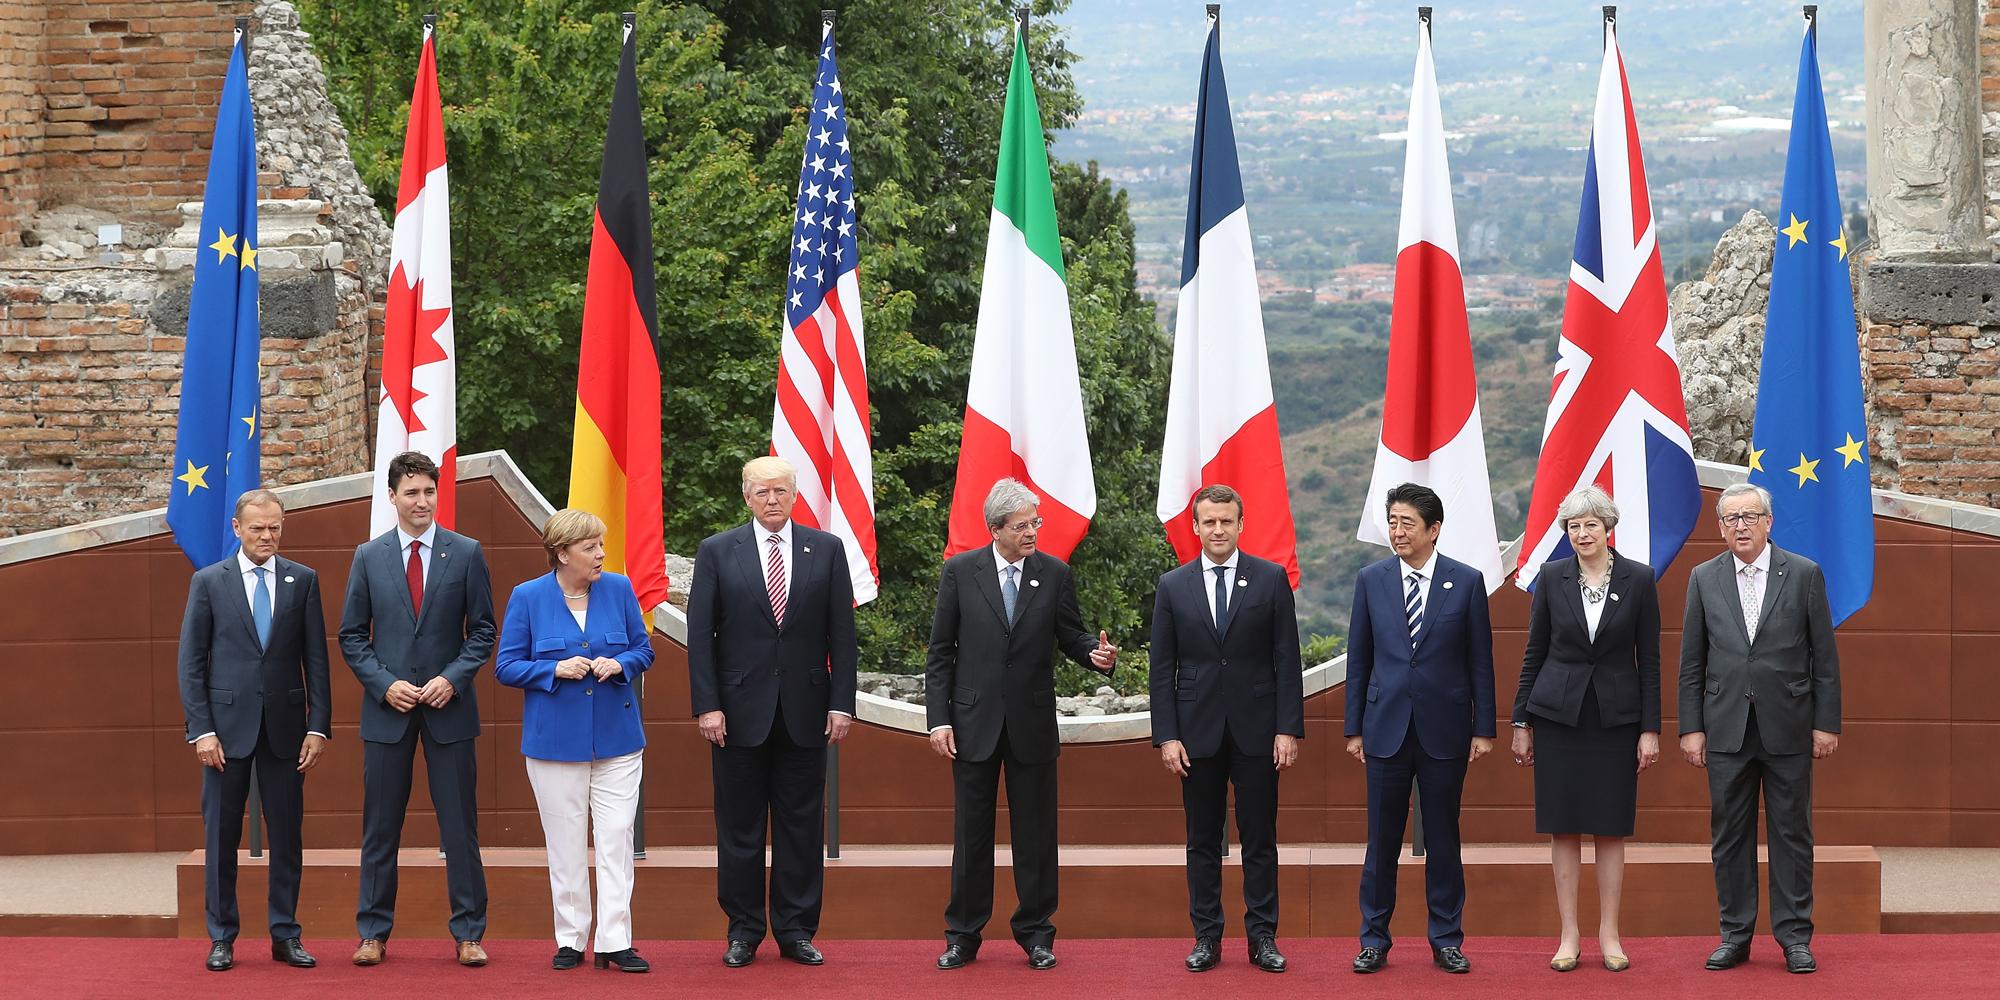 Donald Trump met with G7 leaders in Taormina, Italy but was not persuaded by their arguments for the US to stay in the Paris climate accords